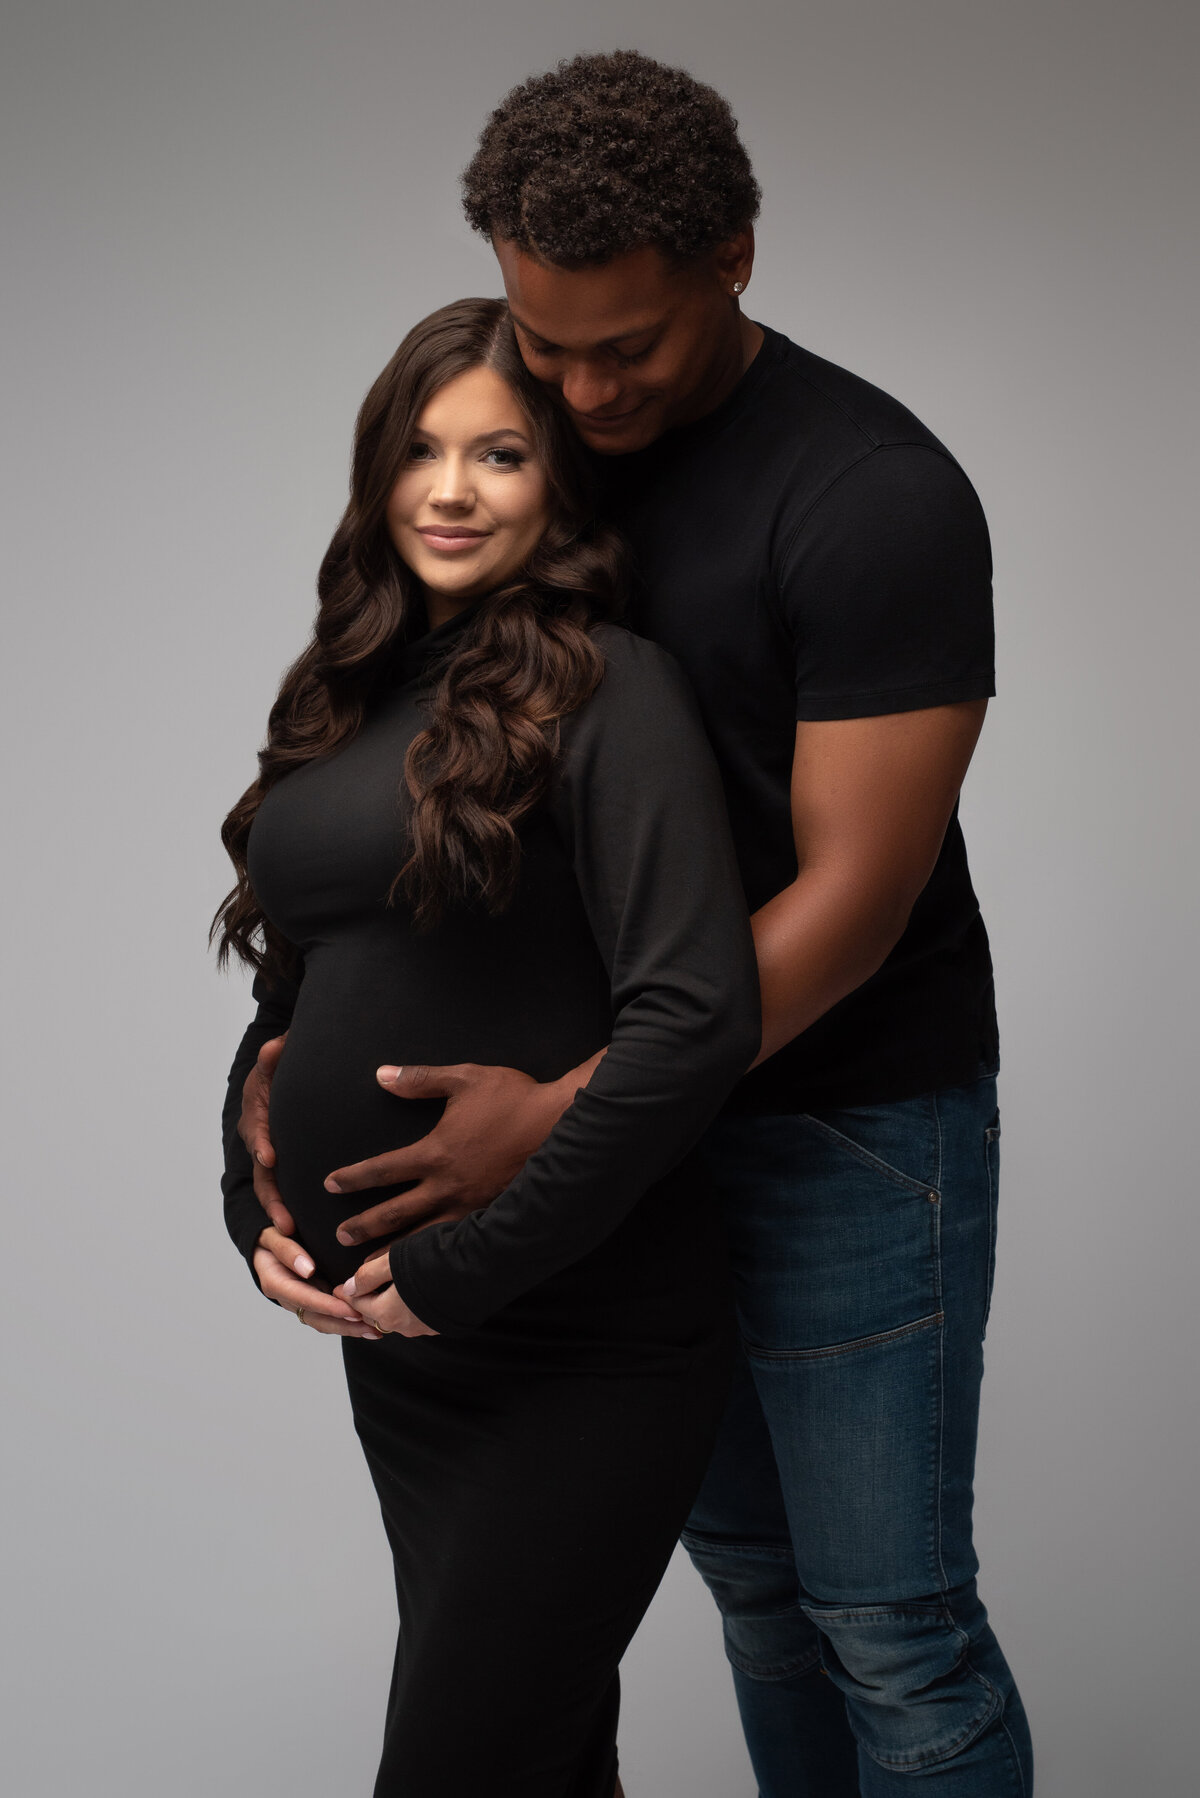 man wearing jeans and black tshirt posing with pregnant woman wearing turtleneck black dress on grey backdrop